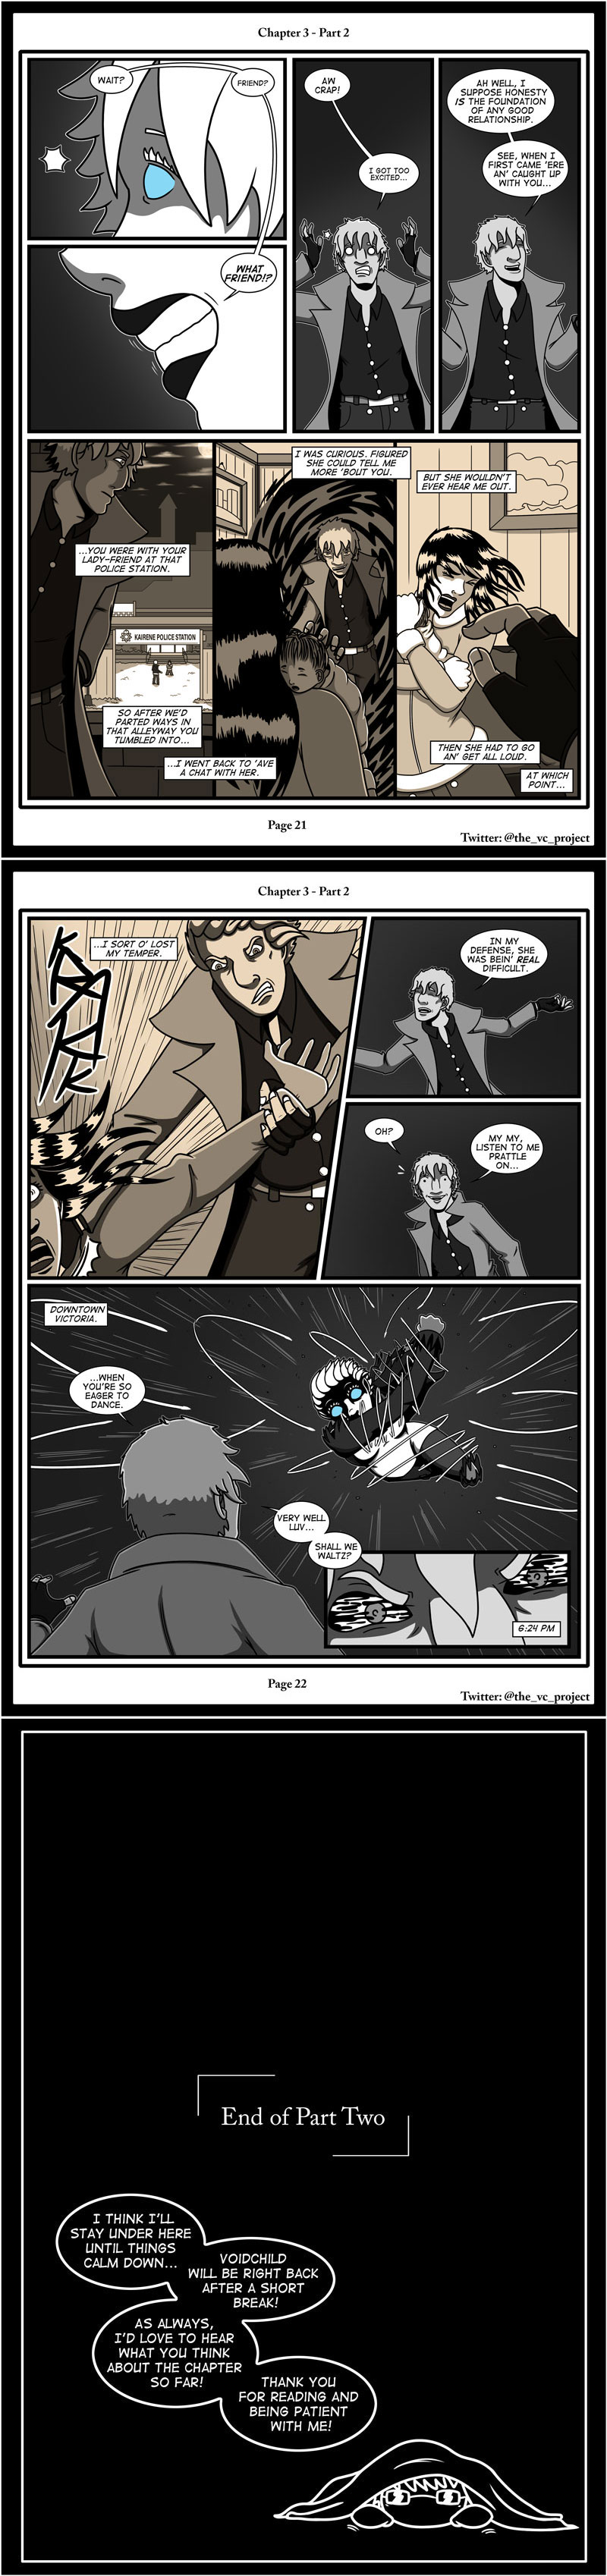 Chapter 3 - Part 2, Page 21-22